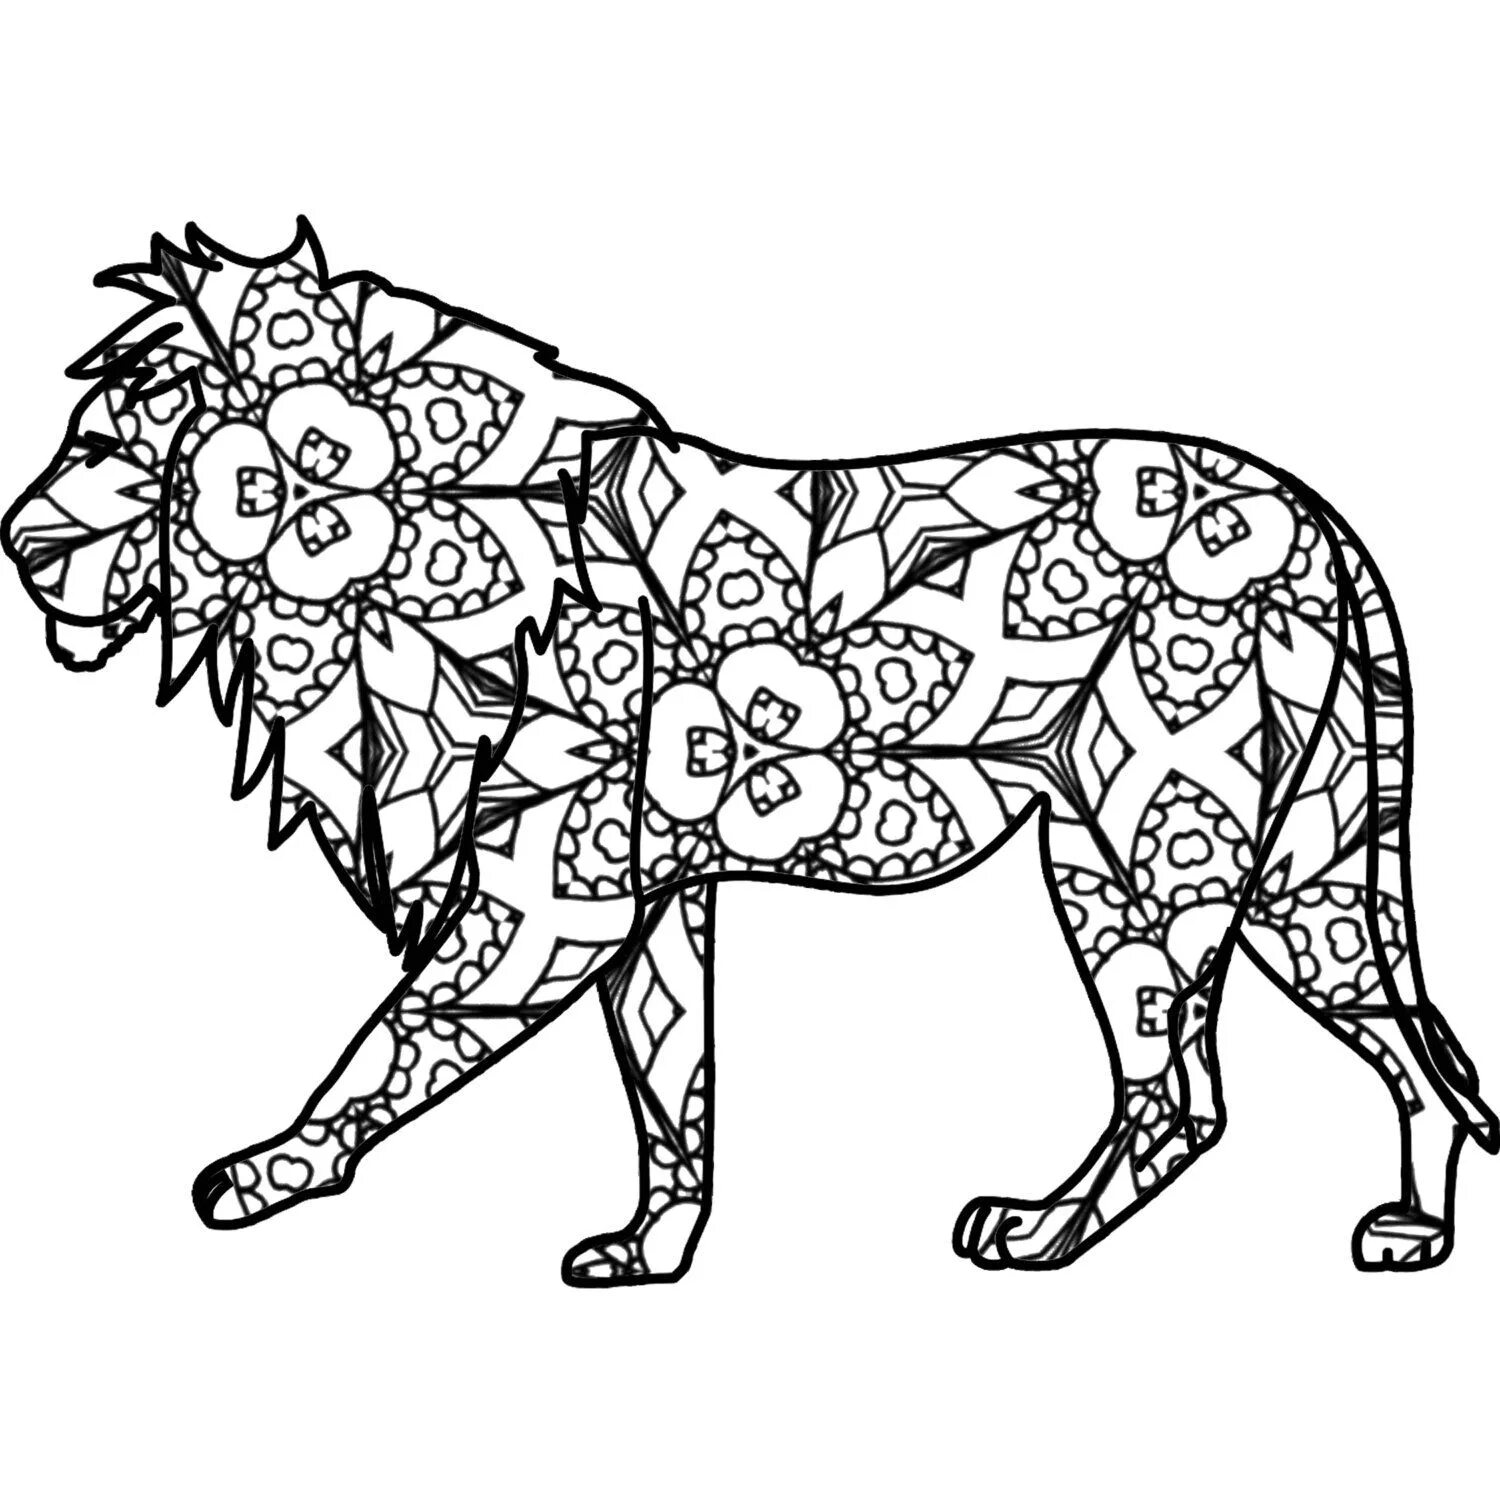 Animal coloring page with colorful pattern